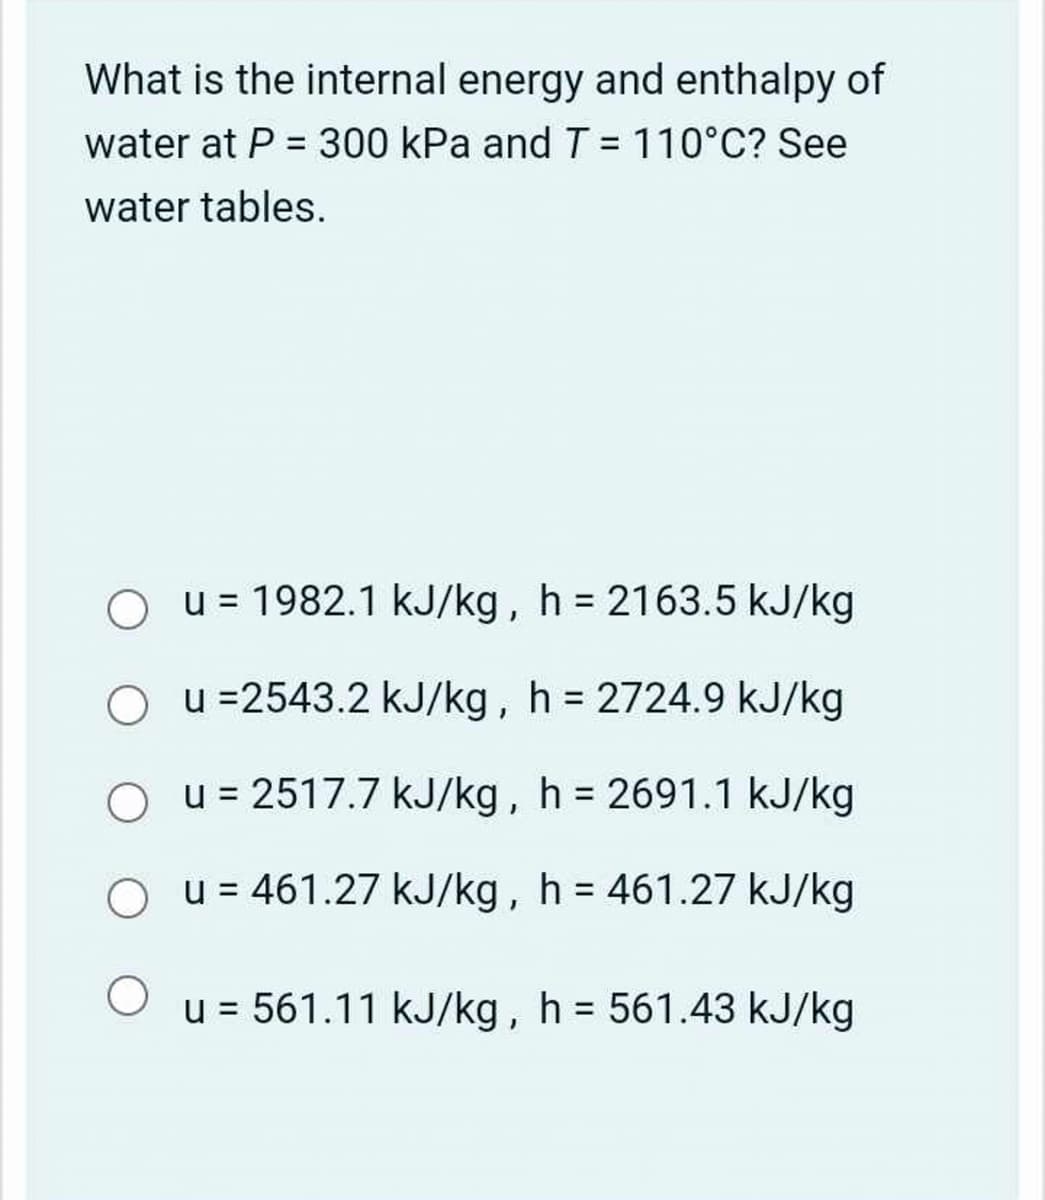 What is the internal energy and enthalpy of
water at P = 300 kPa and T = 110°C? See
water tables.
u = 1982.1 kJ/kg, h = 2163.5 kJ/kg
Ou =2543.2 kJ/kg, h = 2724.9 kJ/kg
Ou=2517.7 kJ/kg, h = 2691.1 kJ/kg
О
u = 461.27 kJ/kg, h = 461.27 kJ/kg
u = 561.11 kJ/kg, h = 561.43 kJ/kg